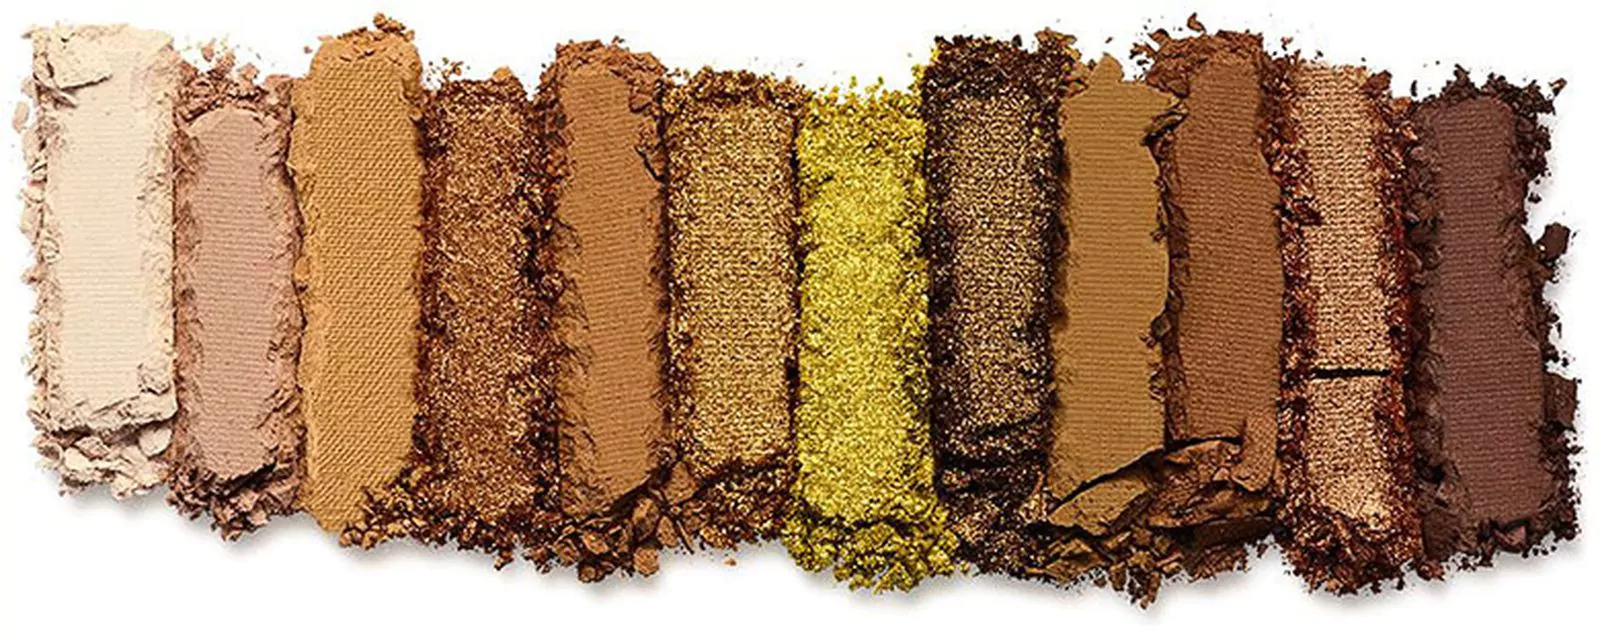 Urban Decay, палетка Naked Honey, оттенки: Flyby, Sweet, Swarm, Amber, Keeper, Golden, Honey, Queen, Hive, Drip, HBIC, Sting